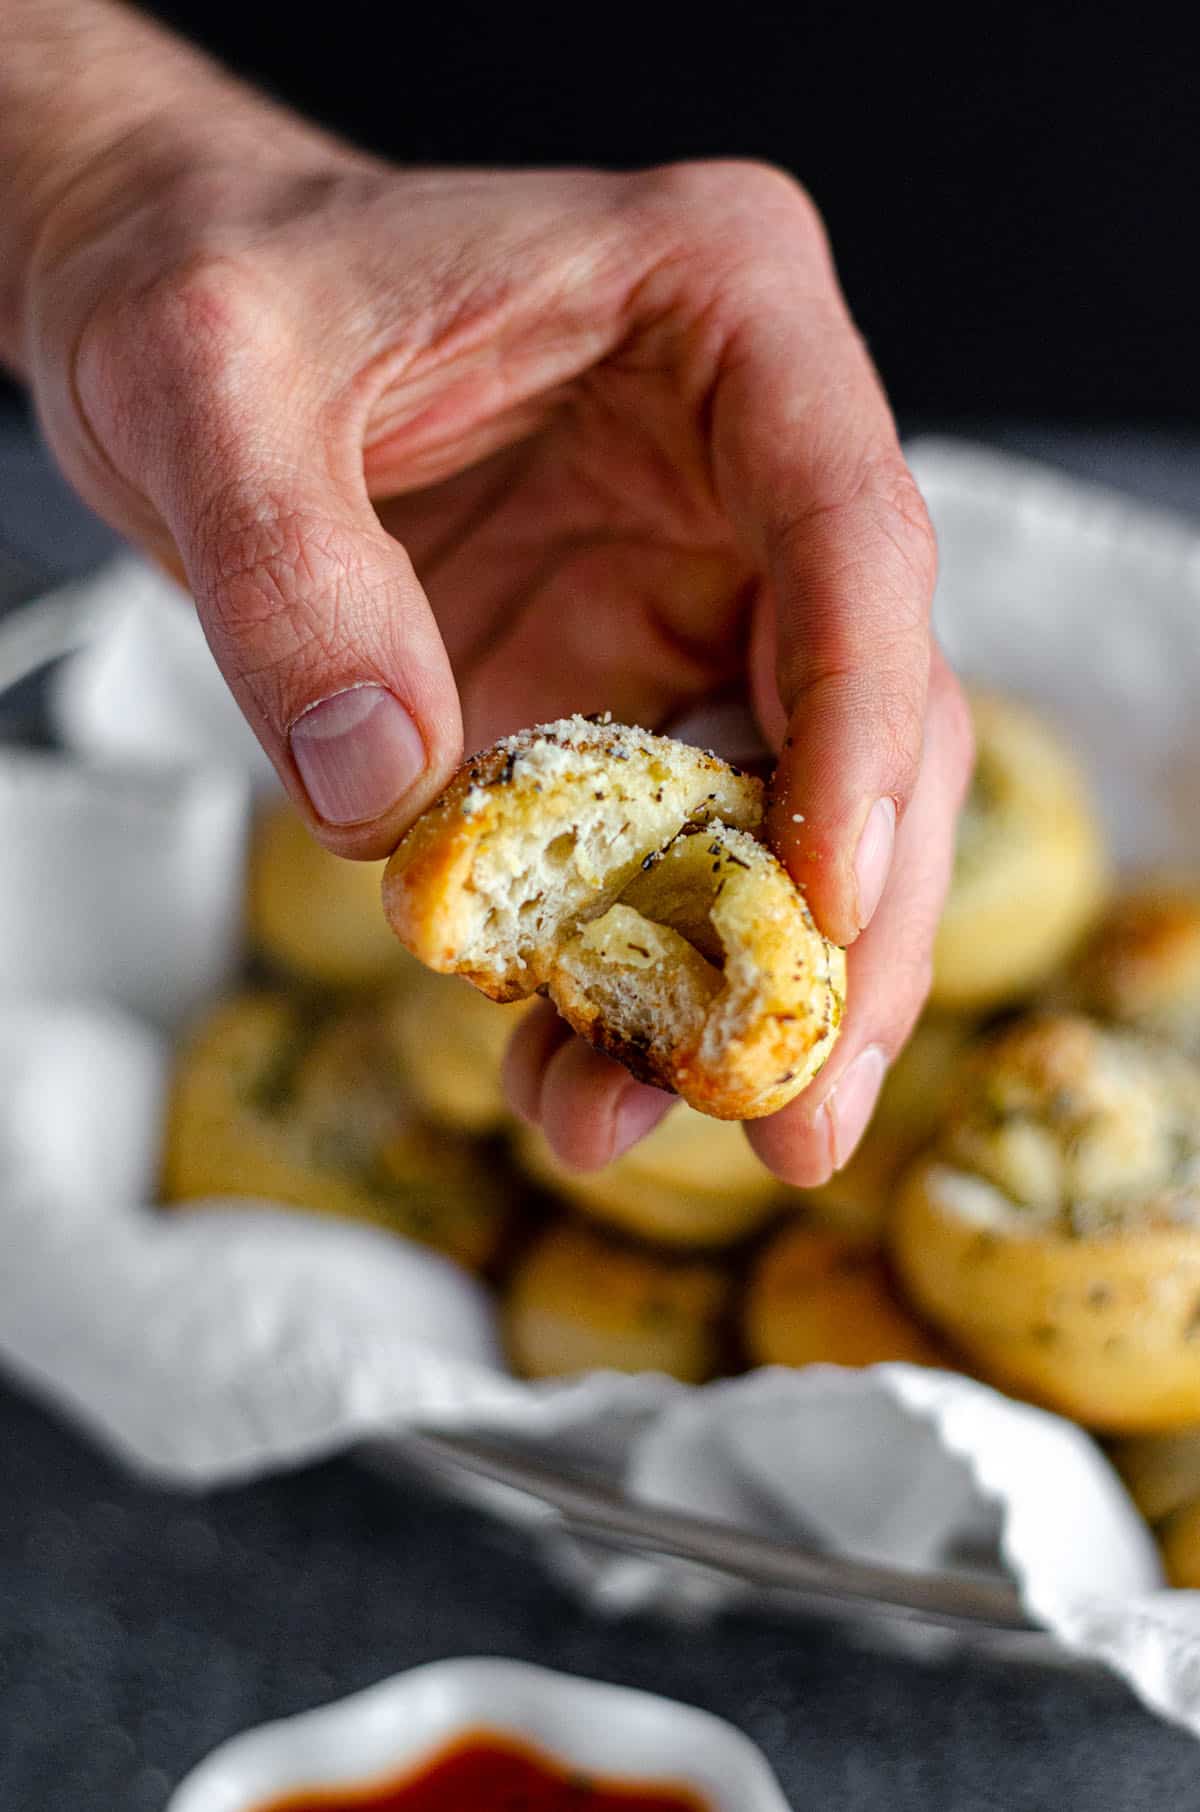 Homemade Garlic Knots: Easy garlic knots made from store bought pizza dough. Crunchy and flavorful on the outside, soft and fluffy on the inside, and ready in less than 30 minutes.